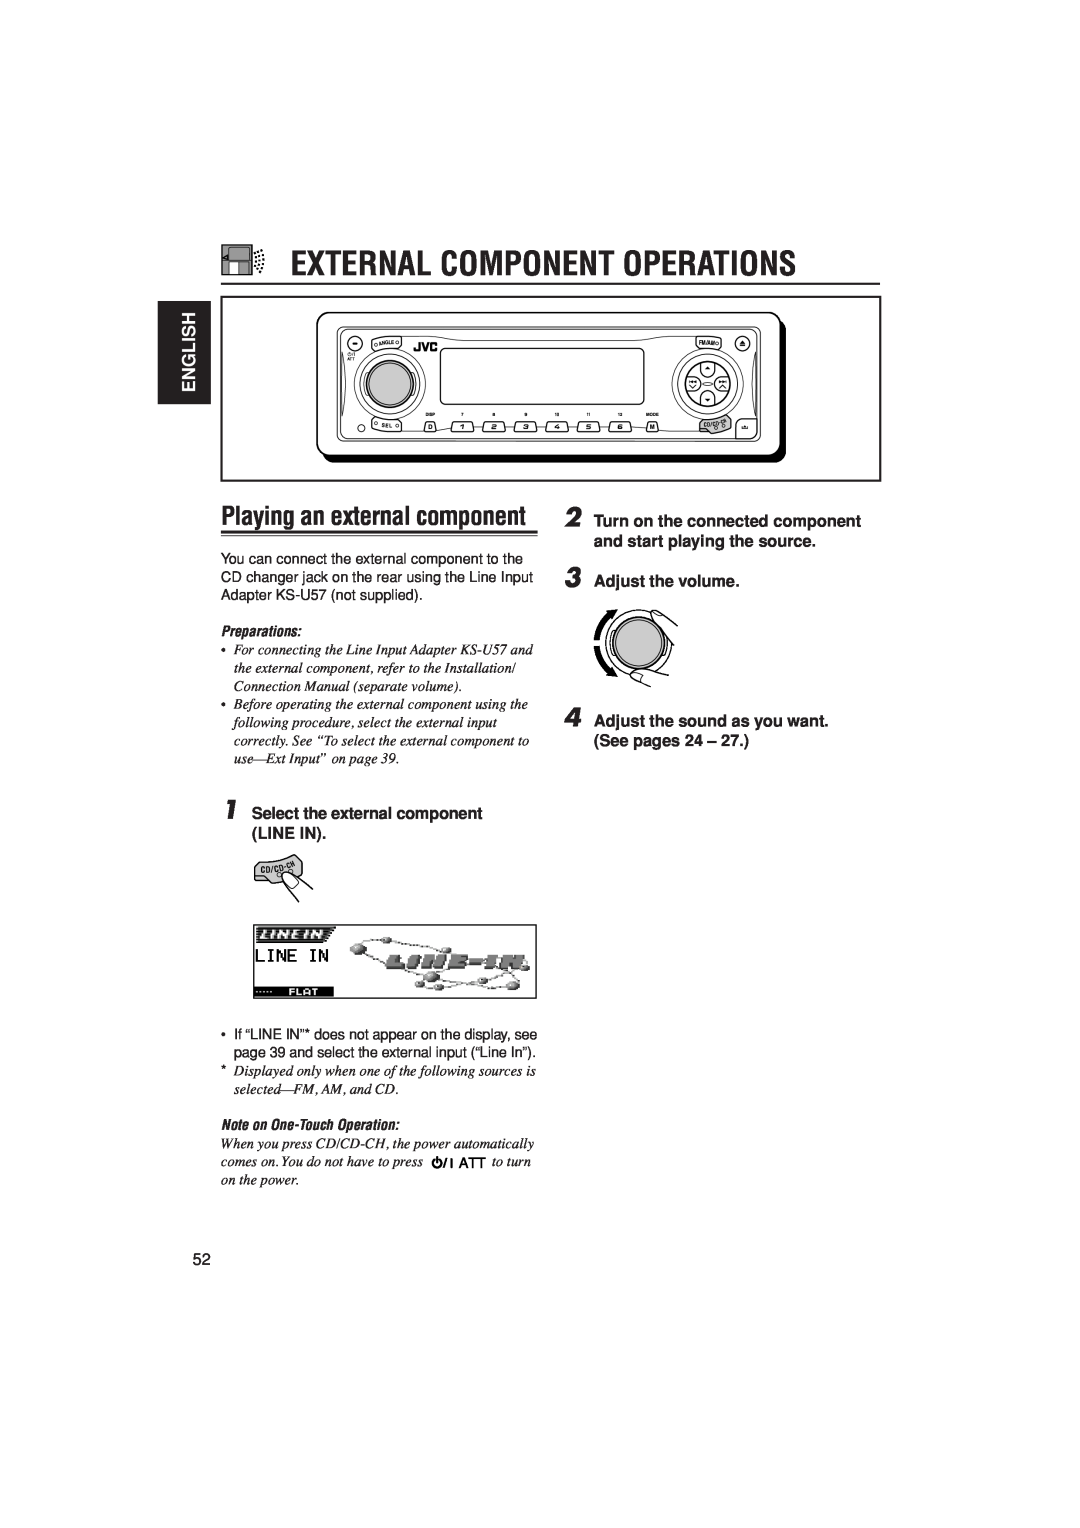 JVC KD-LH305 External Component Operations, Playing an external component, English, Select the external component LINE IN 